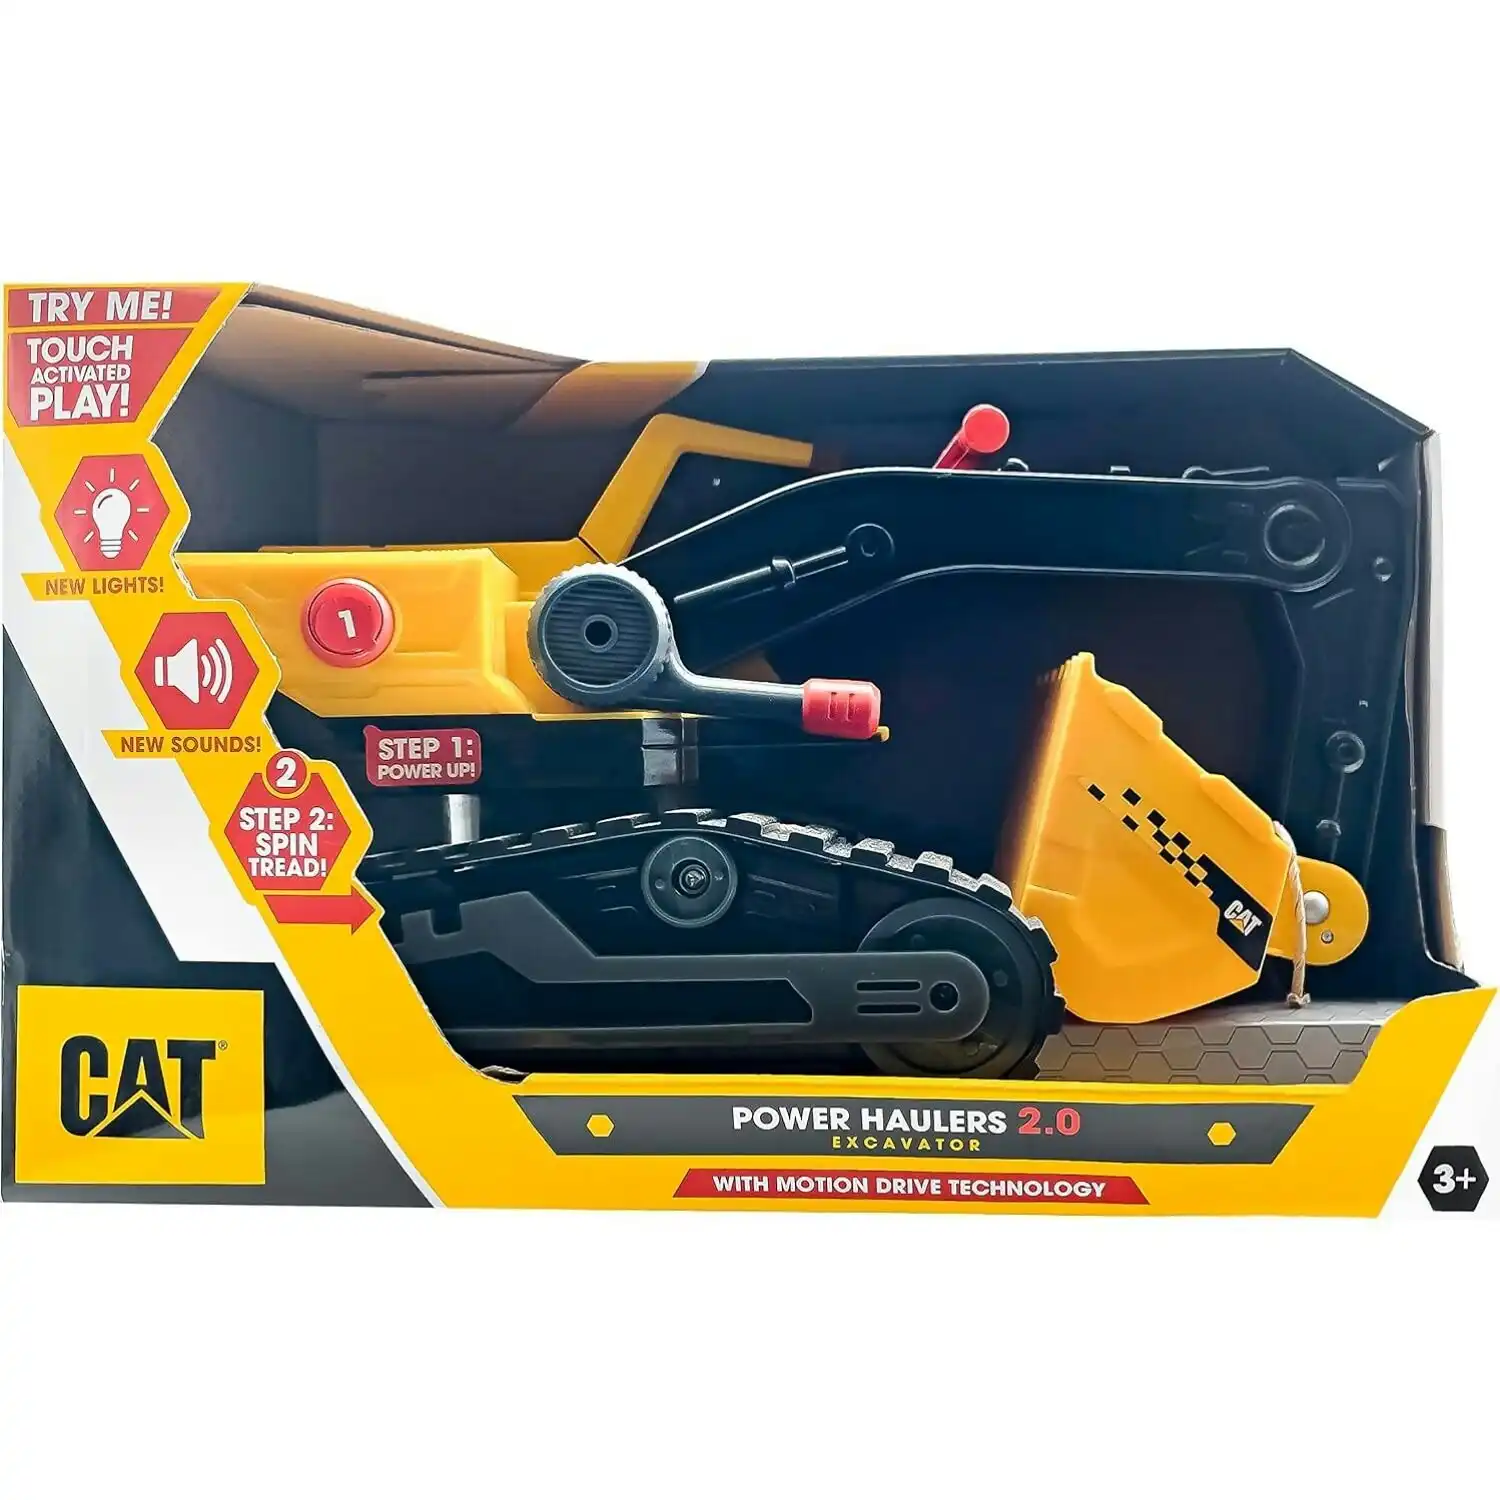 Cat - Power Haulers 2.0 Excavator 12-inch With Motion Drive Technology